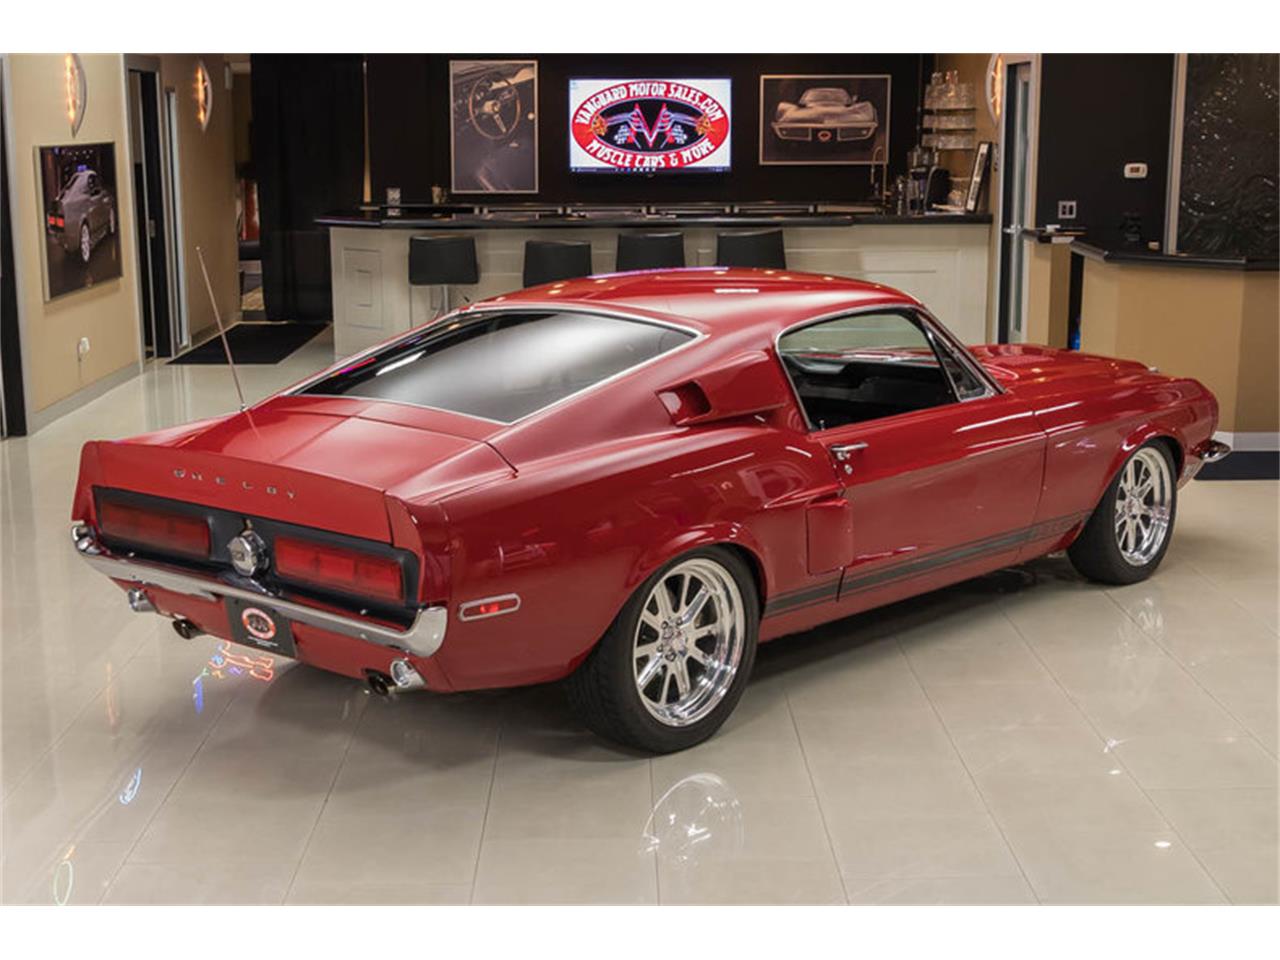 1968 Ford Mustang Fastback Shelby GT500 Recreation for Sale ...